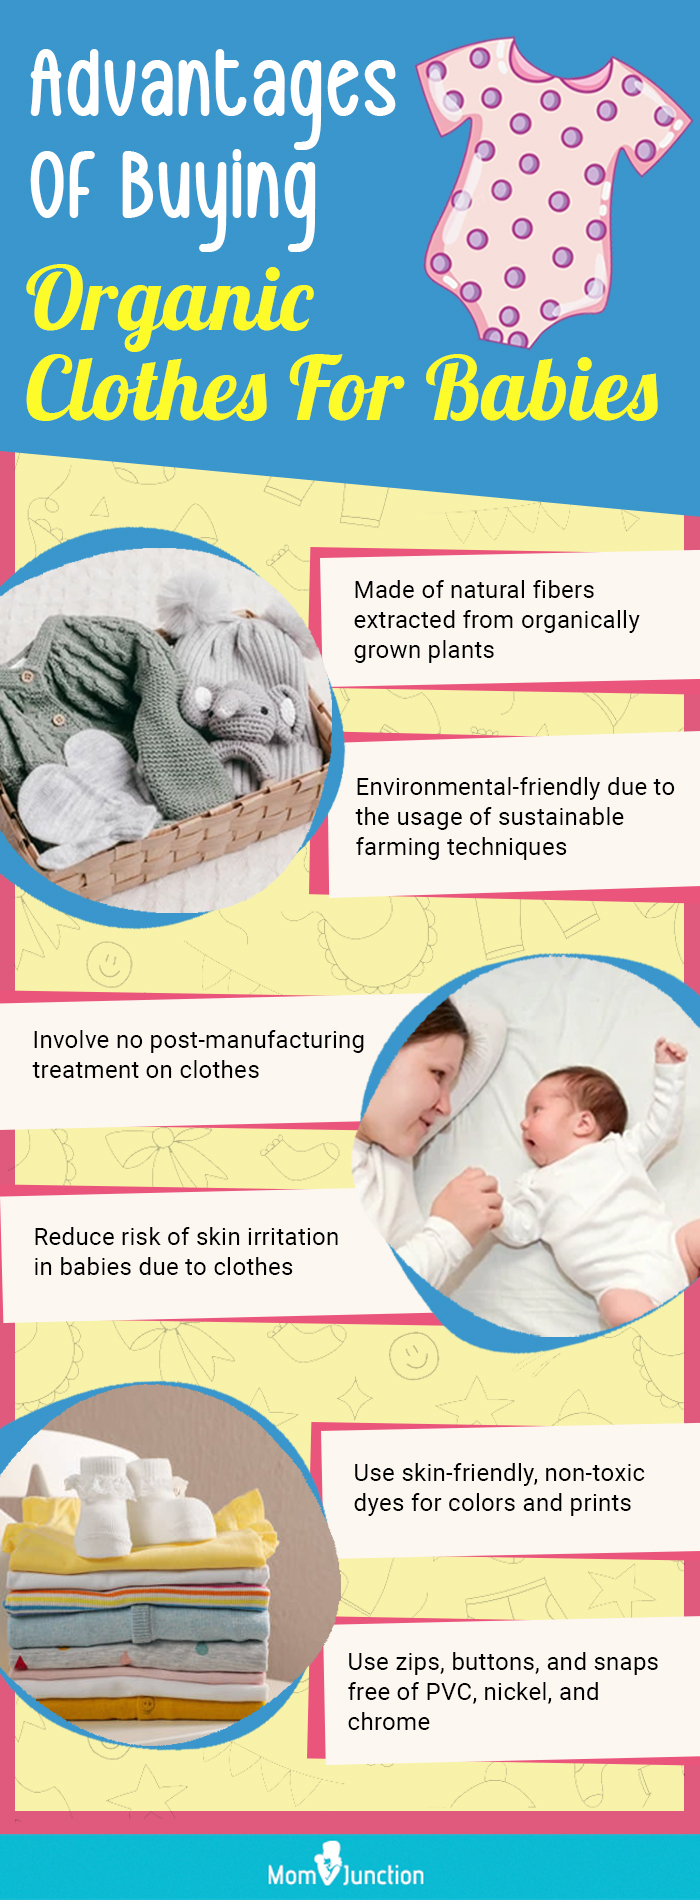 What Are The Advantages Of Buying Organic Clothes For Babies (infographic)